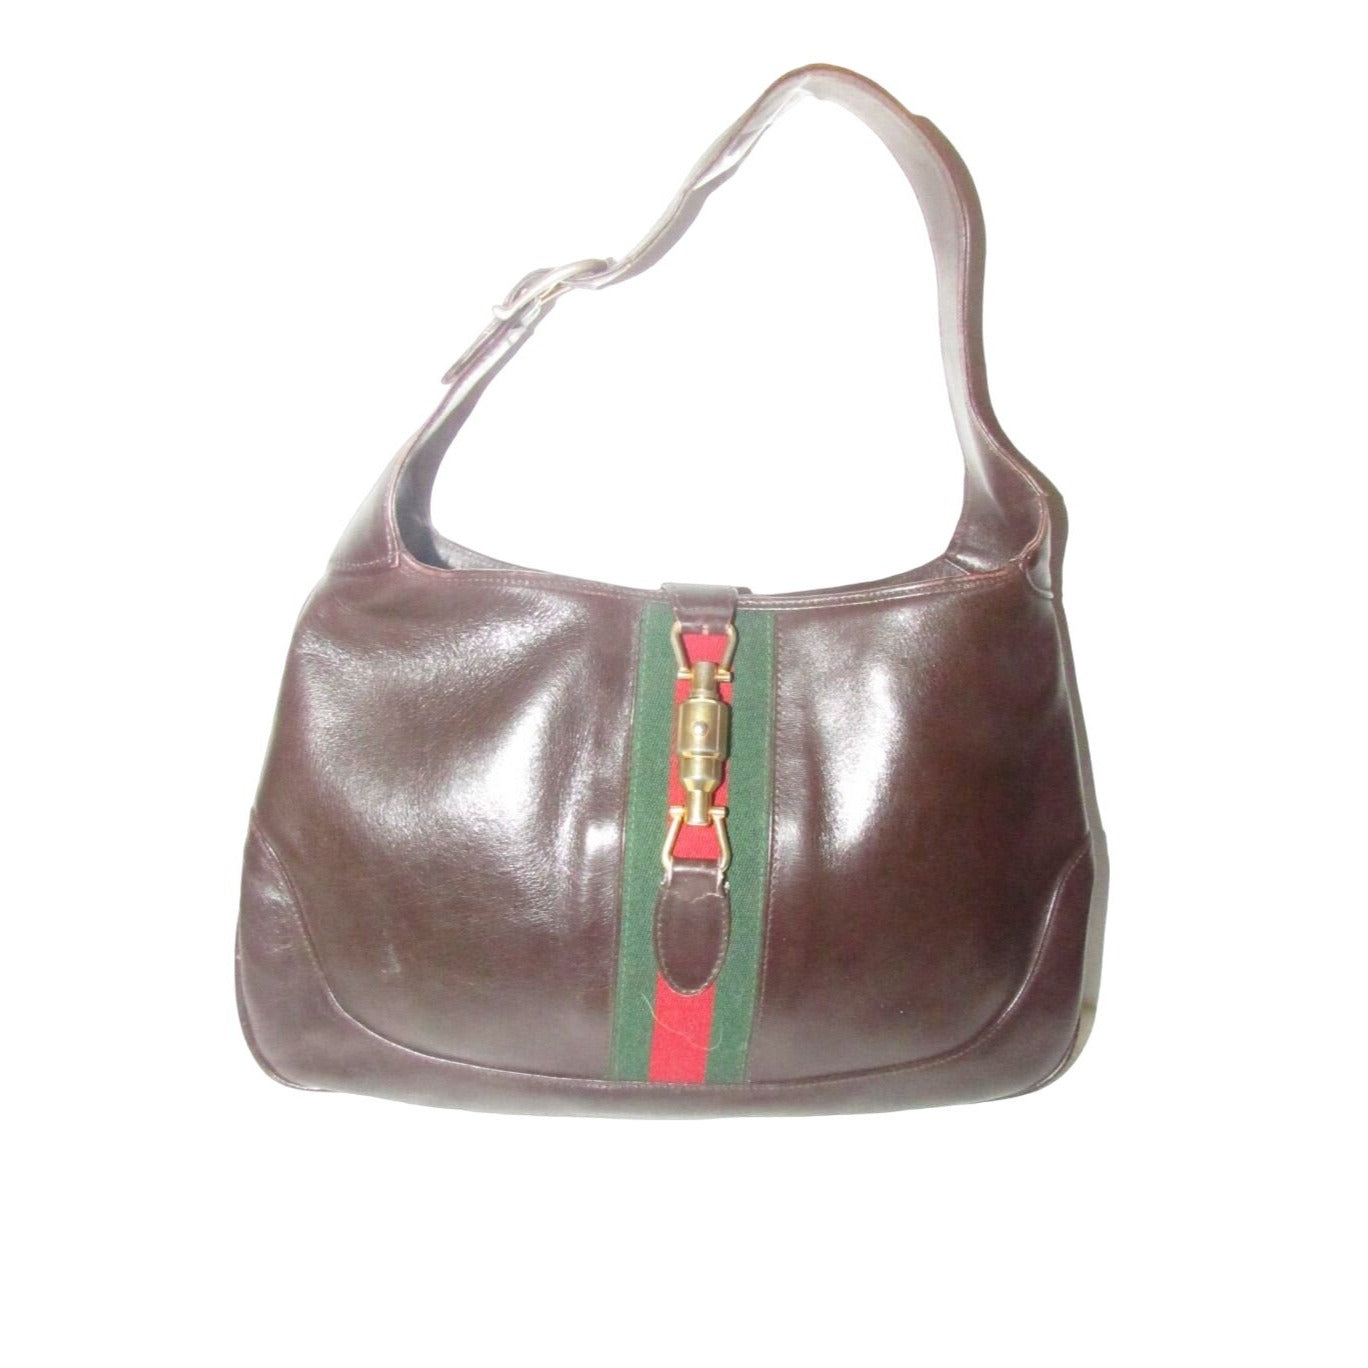 Rare, vintage, Gucci, 1961 Jackie, glossy brown leather hobo style shoulder bag with a red and green center stripe & gold piston closure